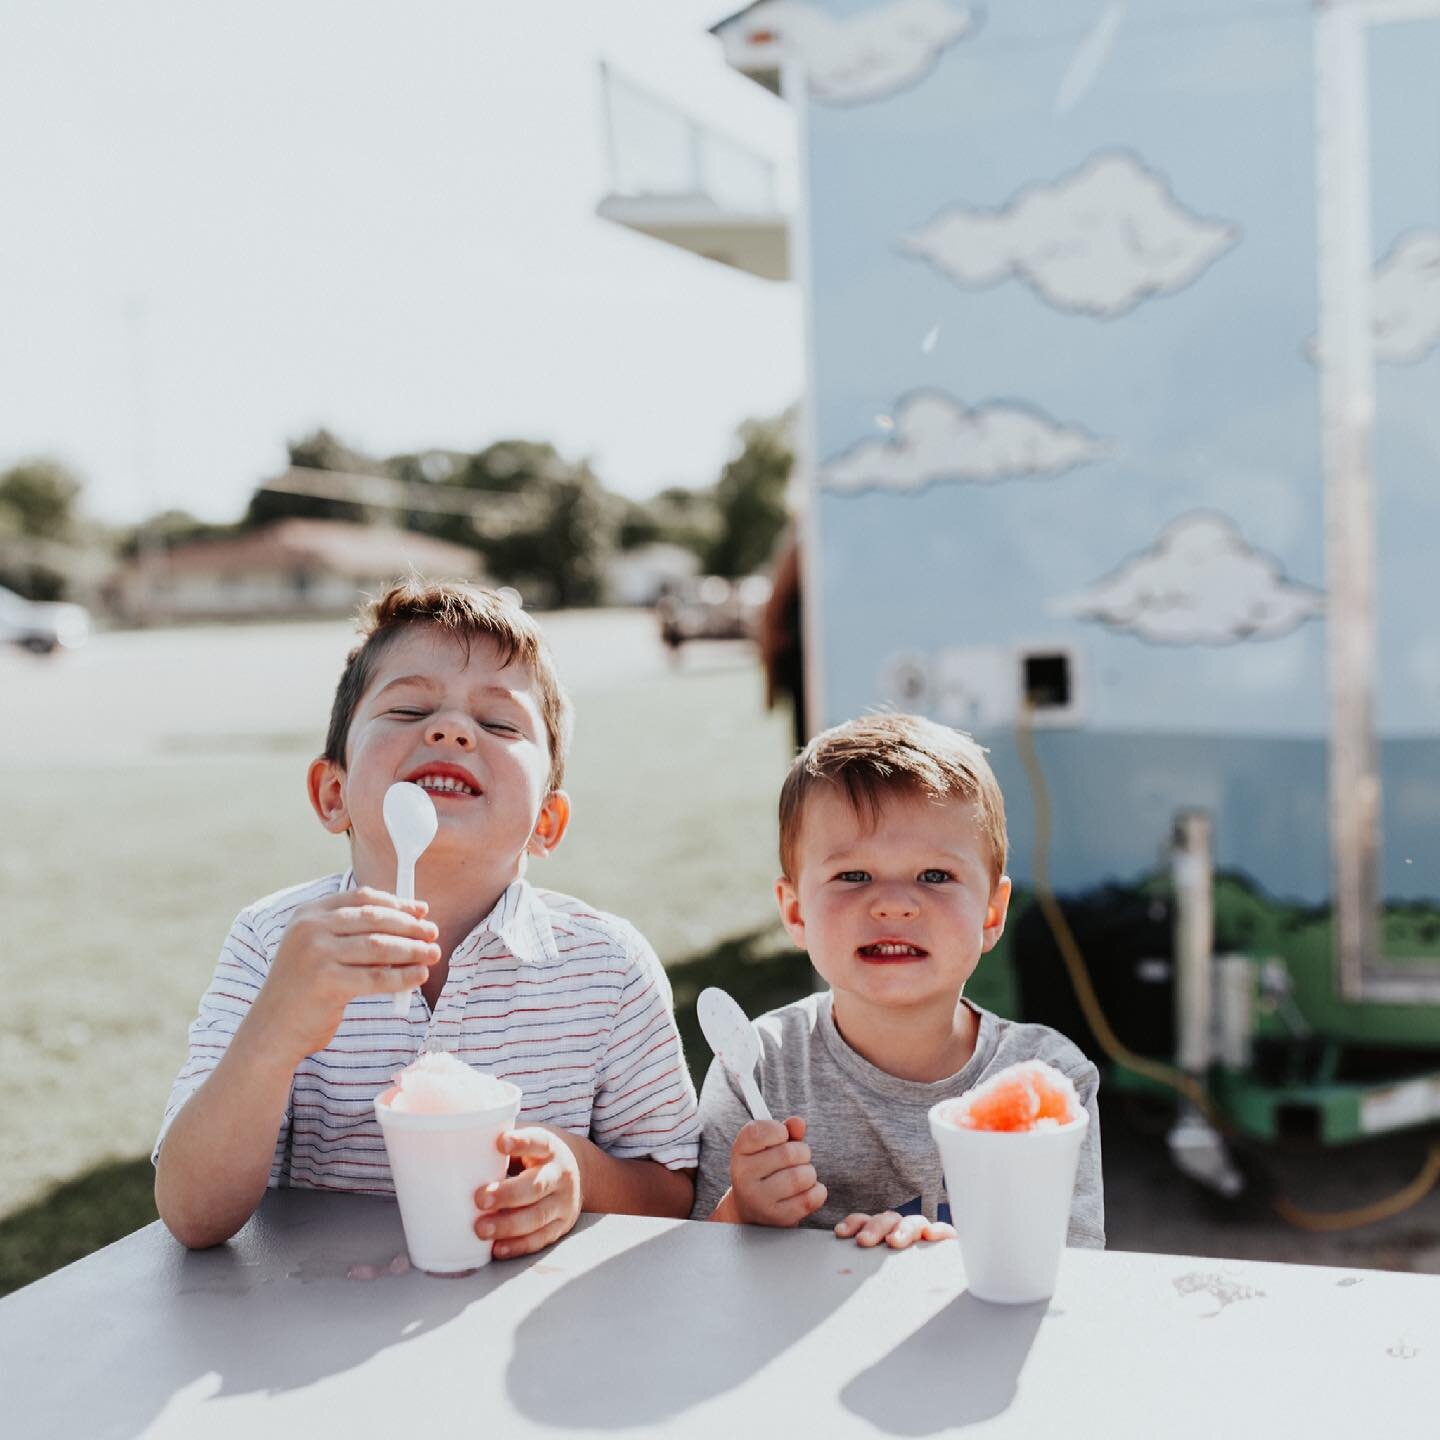 THAT SUMMER IS NEAR FEELING...
About 6 weeks, Tulsa!!!!! 
So many exciting things coming your way this Summer. 
We are so excited to serve you all!! 
&mdash;What flavor are you missing the most? For us, it&rsquo;s Josh&rsquo;s Mix.... 😉 🍧
📷: @kend